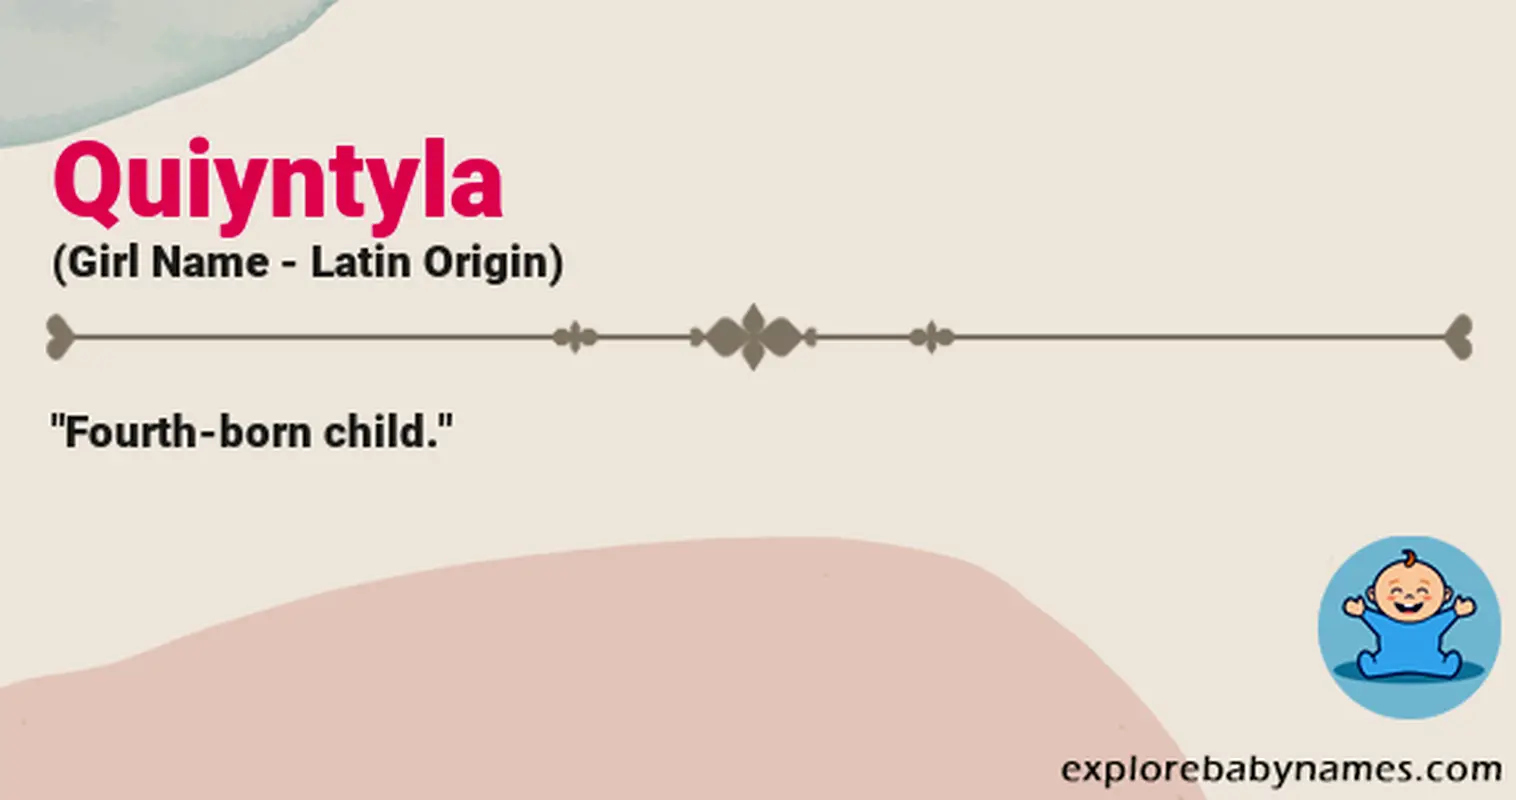 Meaning of Quiyntyla